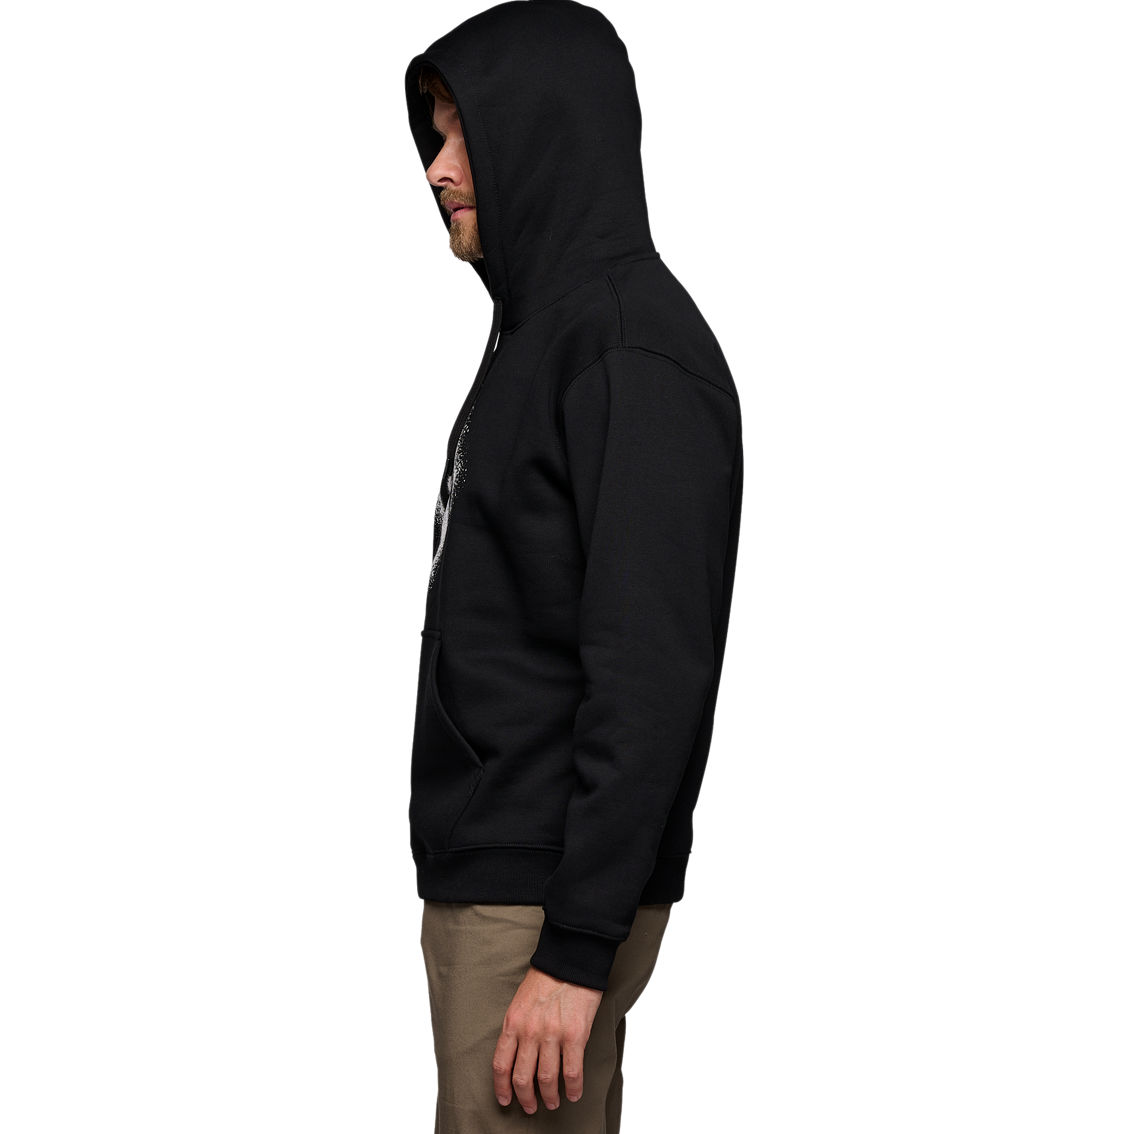 Black Diamond Equipment Chalked Up 2.0 Pullover Hoodie - Image 3 of 4